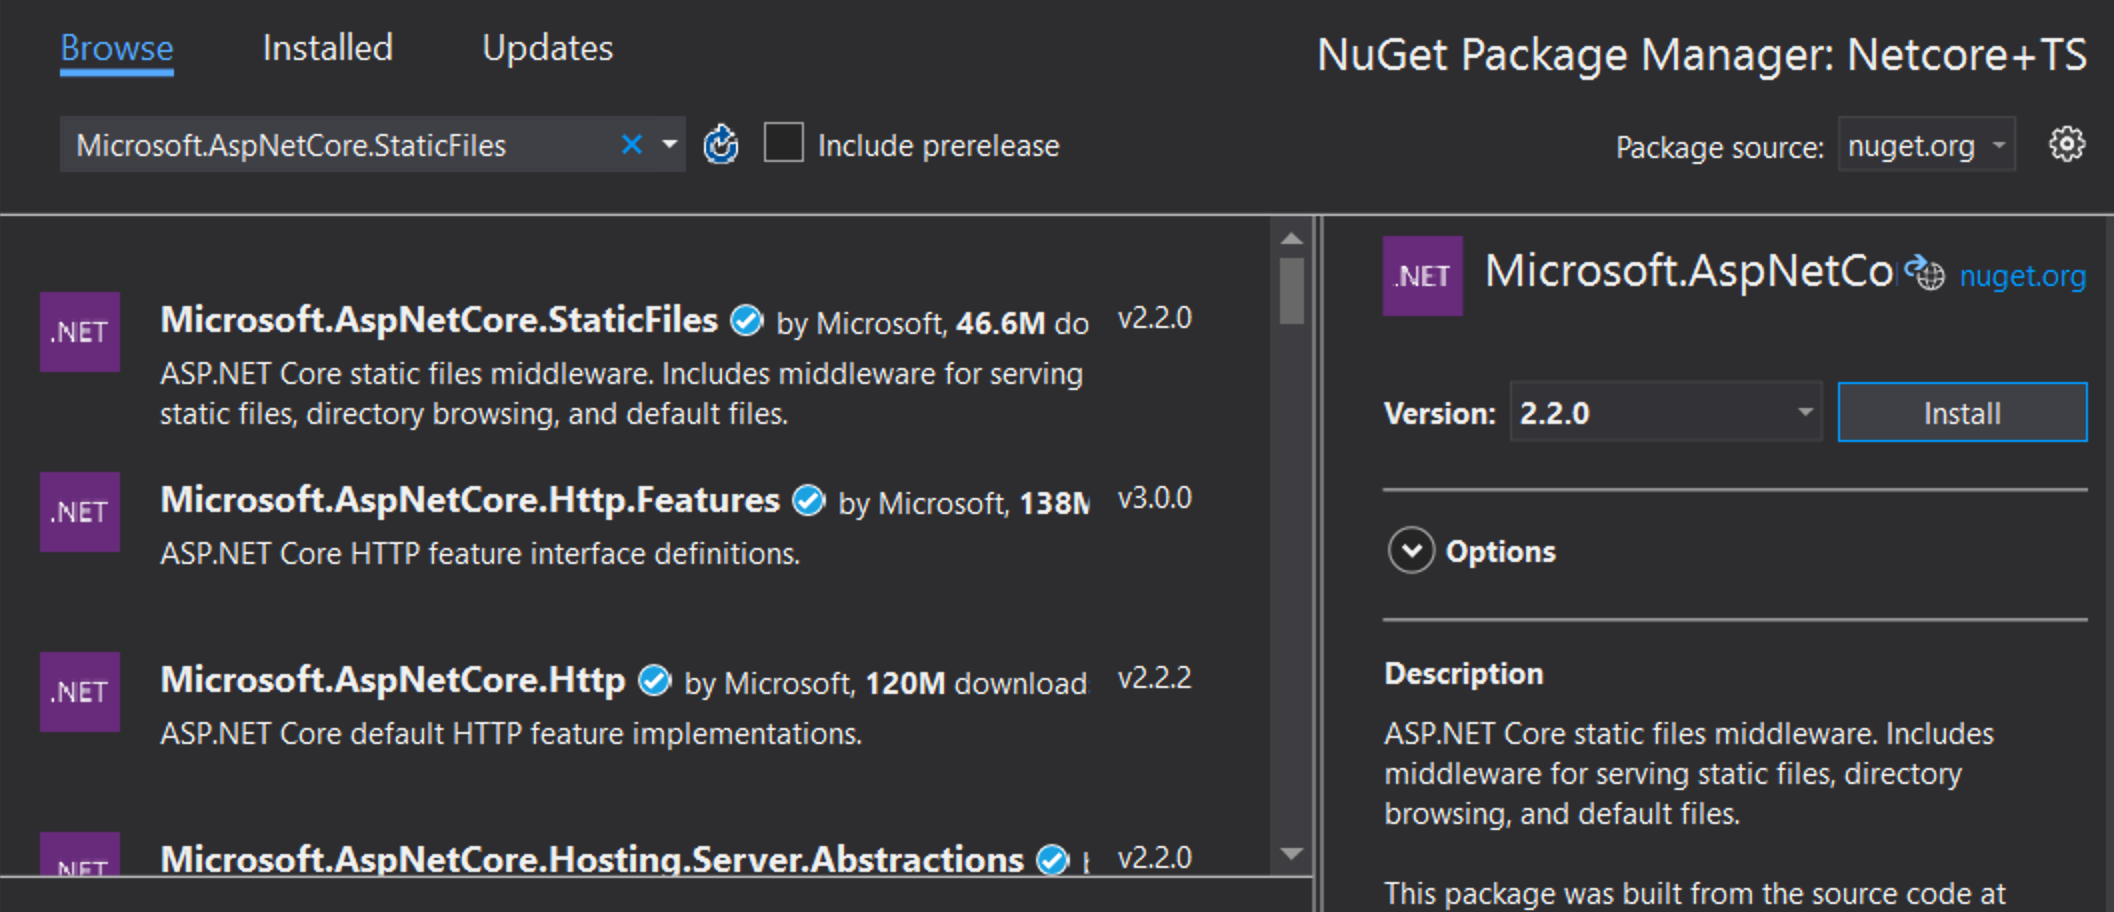 The Visual Studio search for Nuget